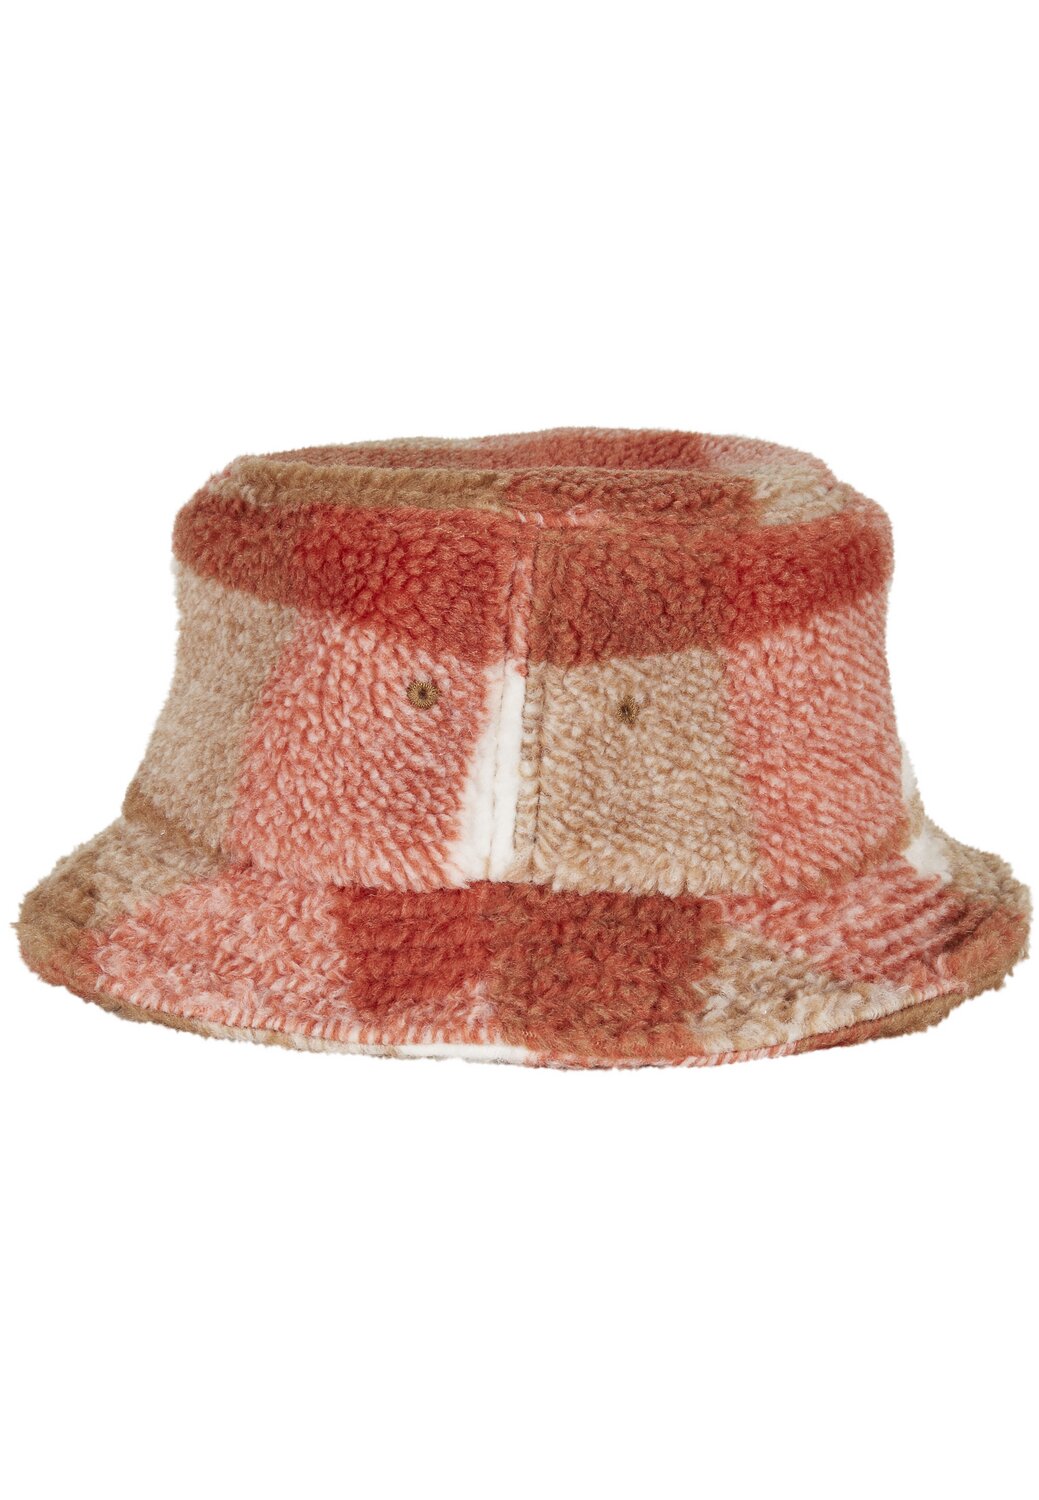 Check Hat Flexfit white/sand/toffee Bucket MAXISCOOT Sherpa |